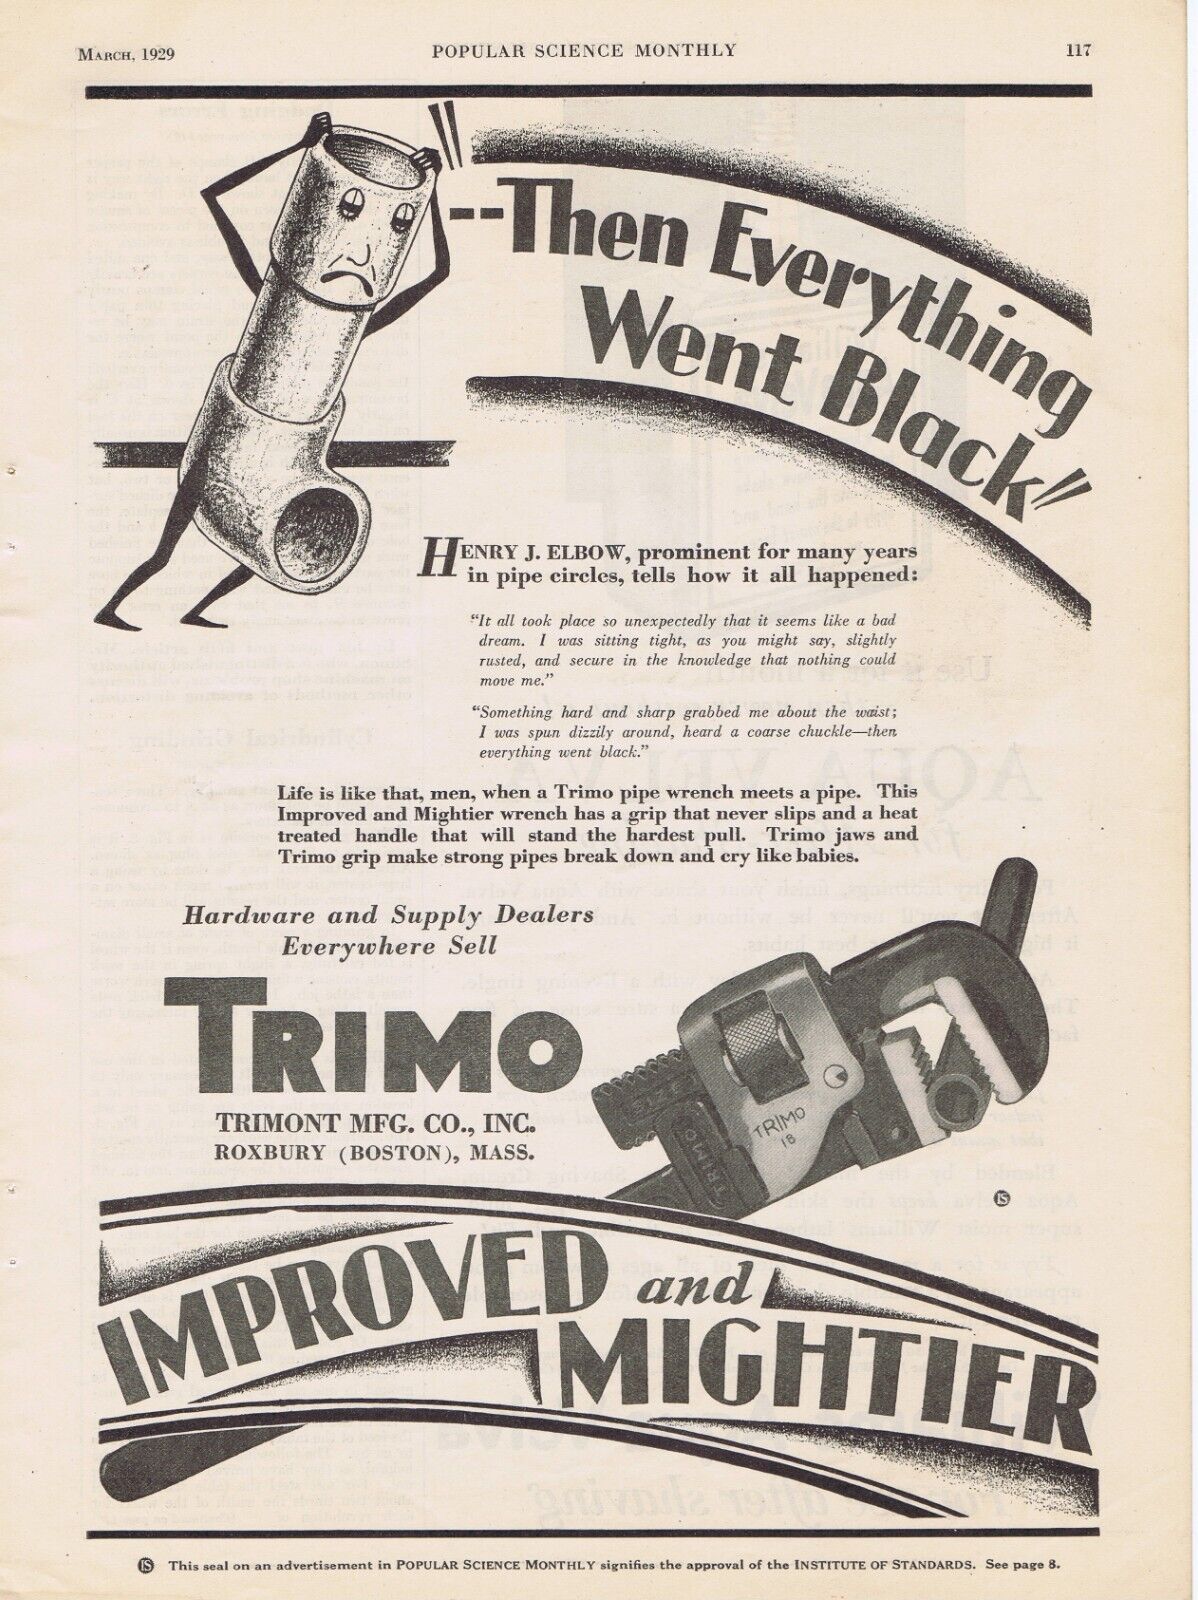 1929 Advertisement - TRIMO PIPE WRENCH, TREMONT MFG., ROXBURY, MA